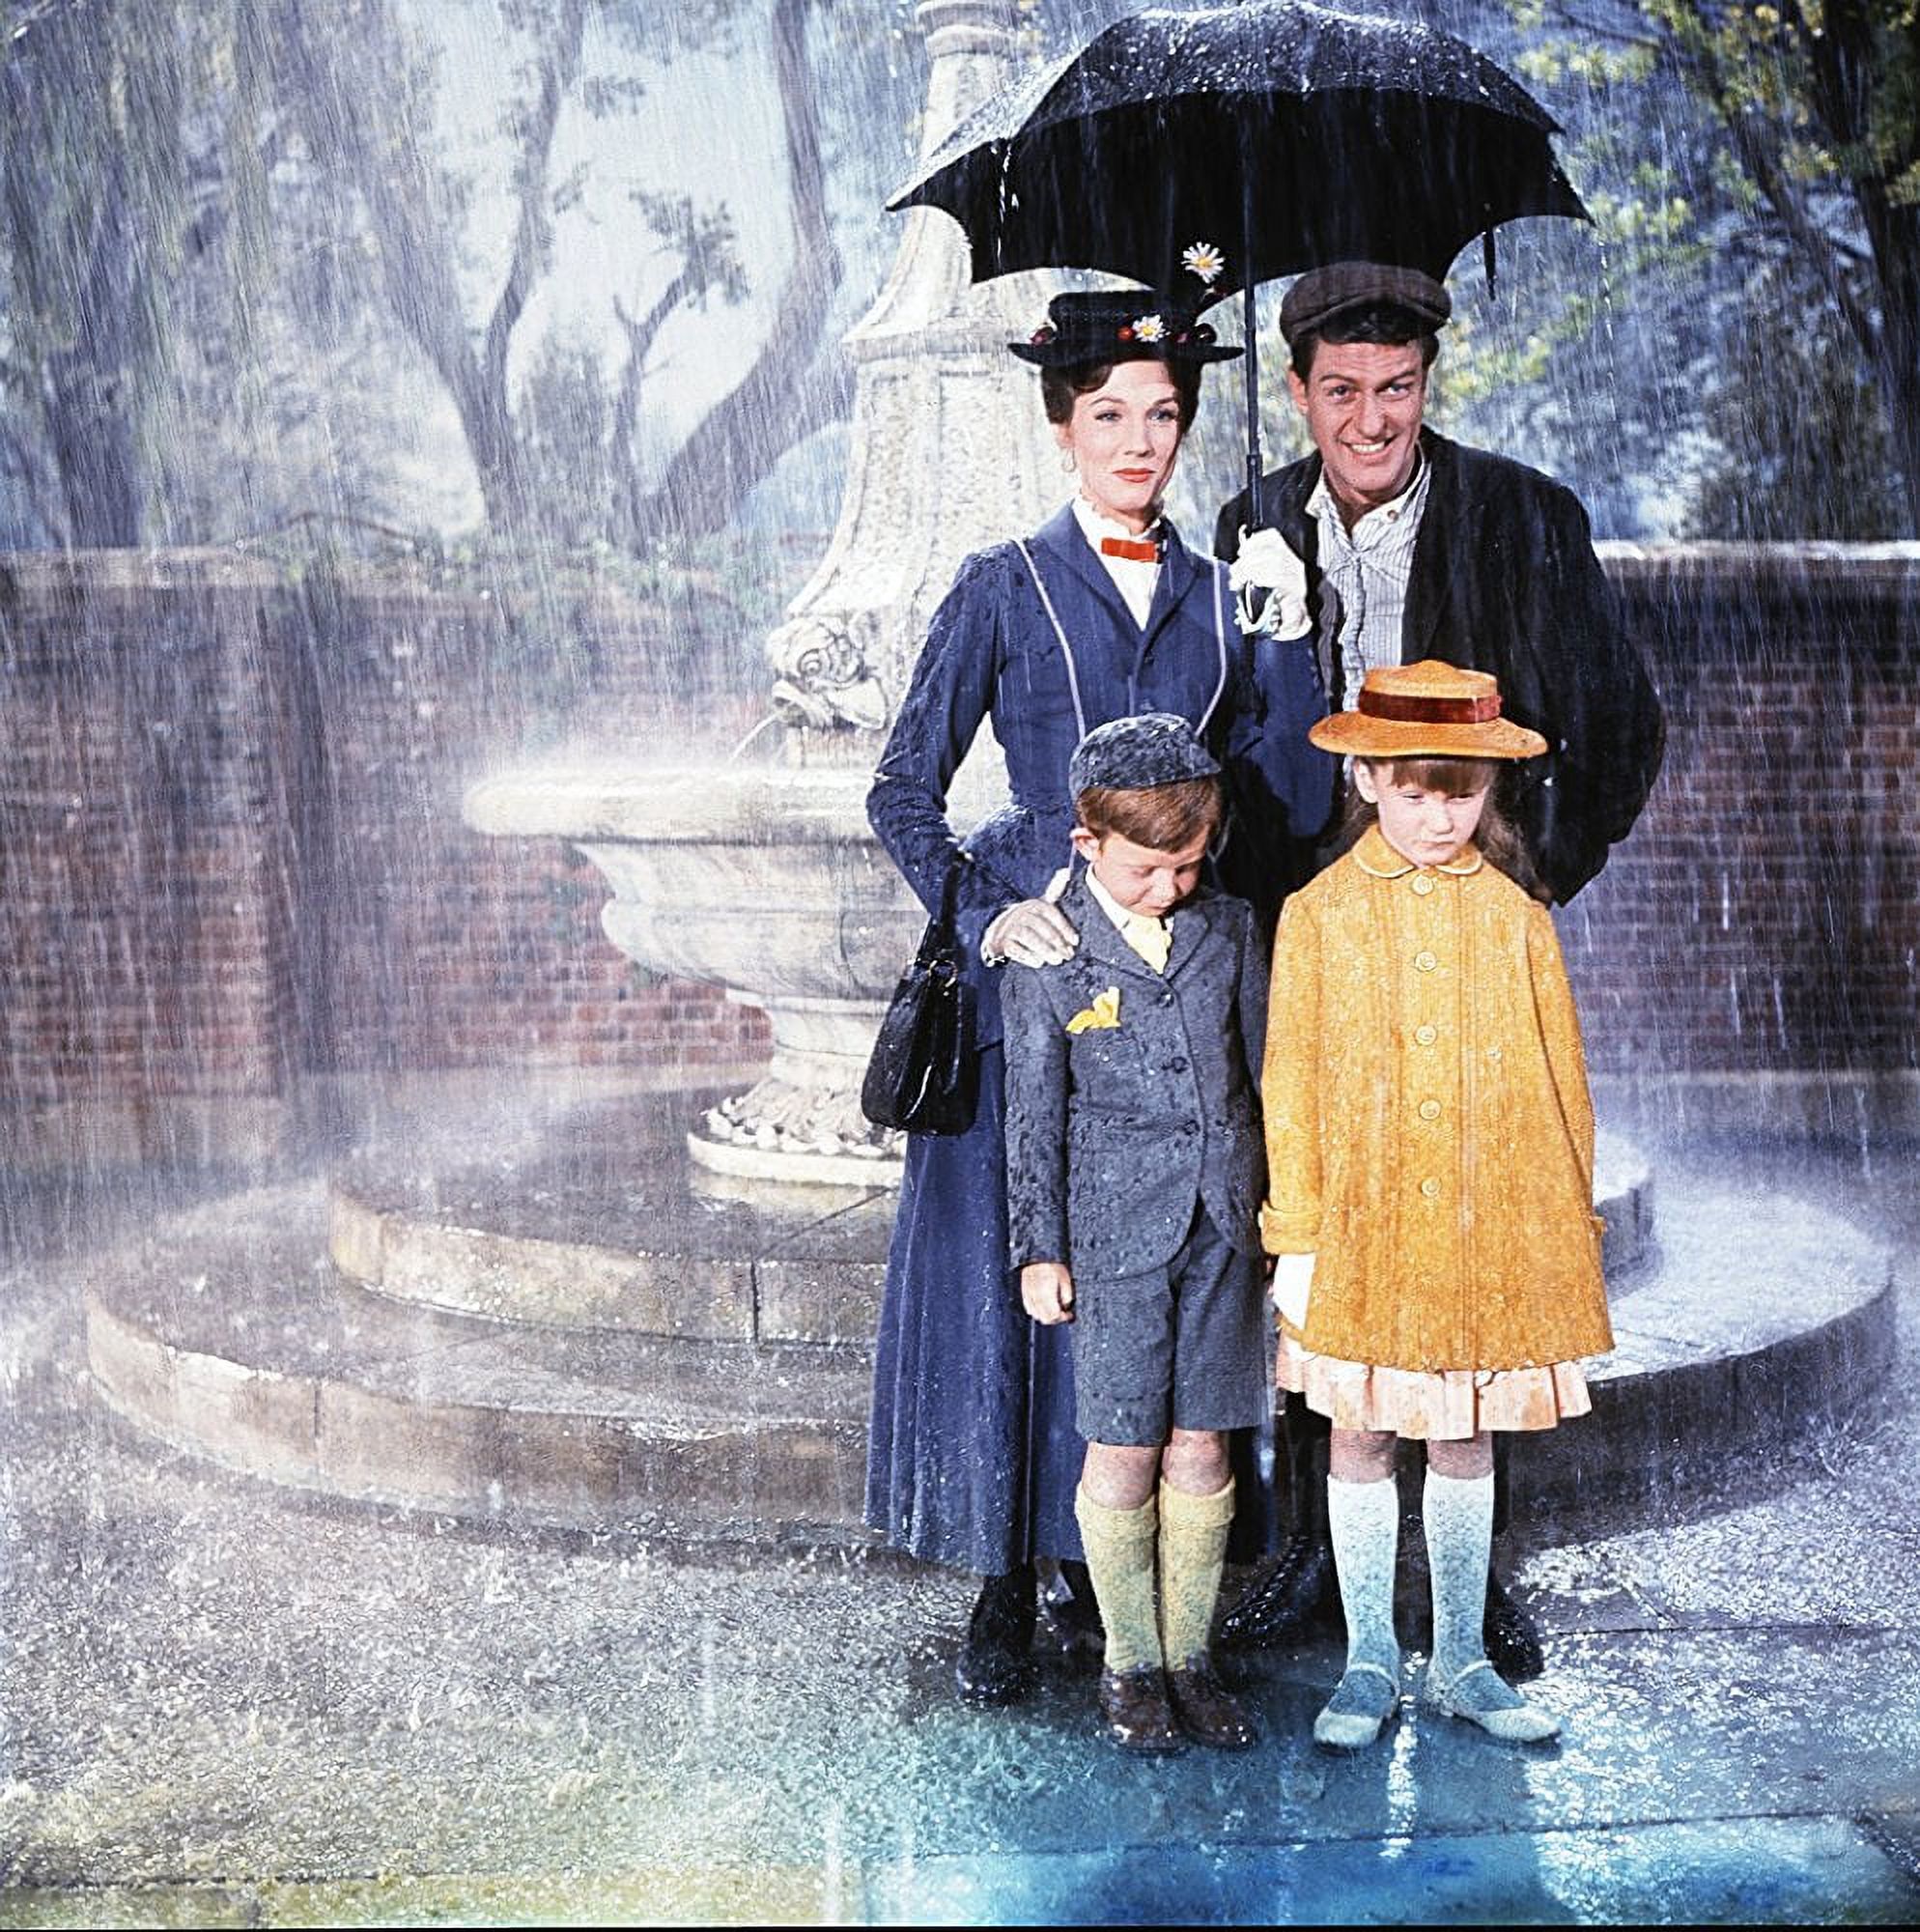 Mary Poppins (DVD + Digital Code) 50th Anniversary Edition - image 5 of 5